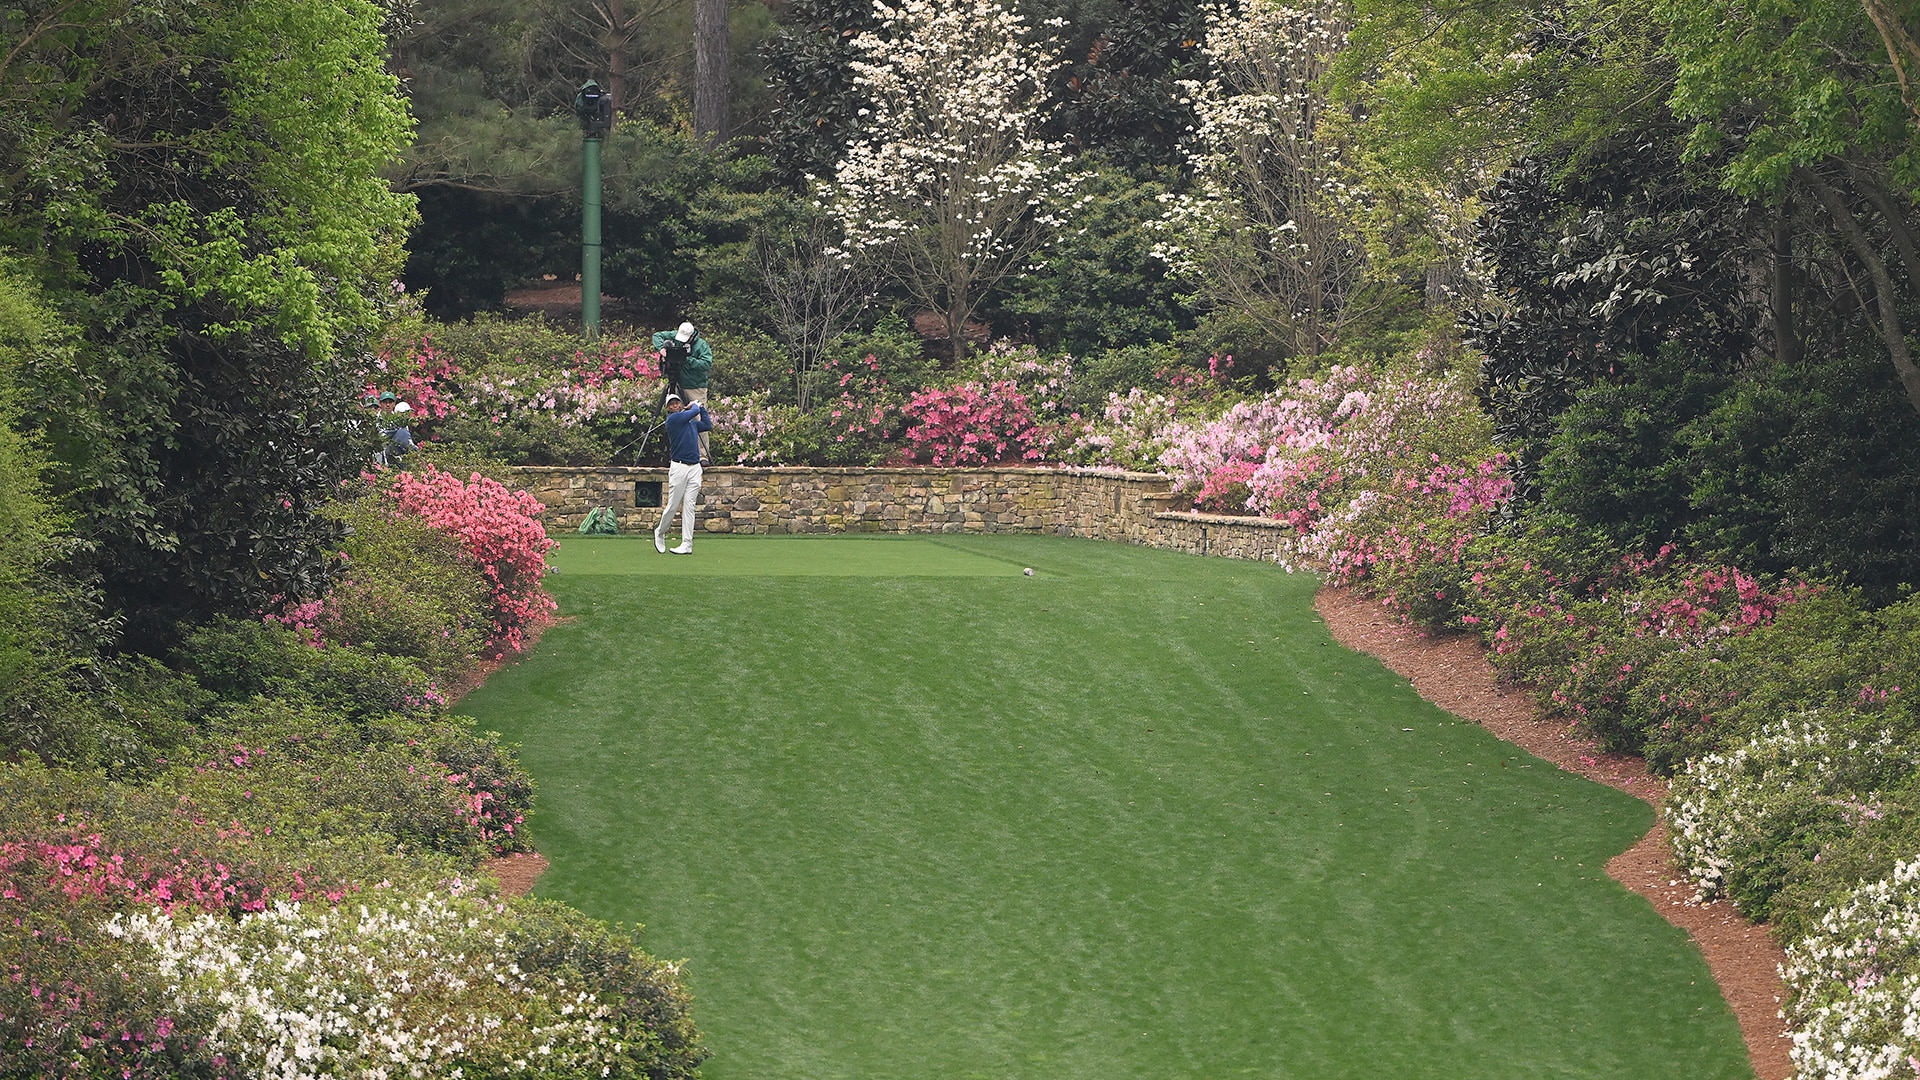 2023 Masters: Players think new 13th tee at Augusta National is ‘easier’, will take excitement out of the hole